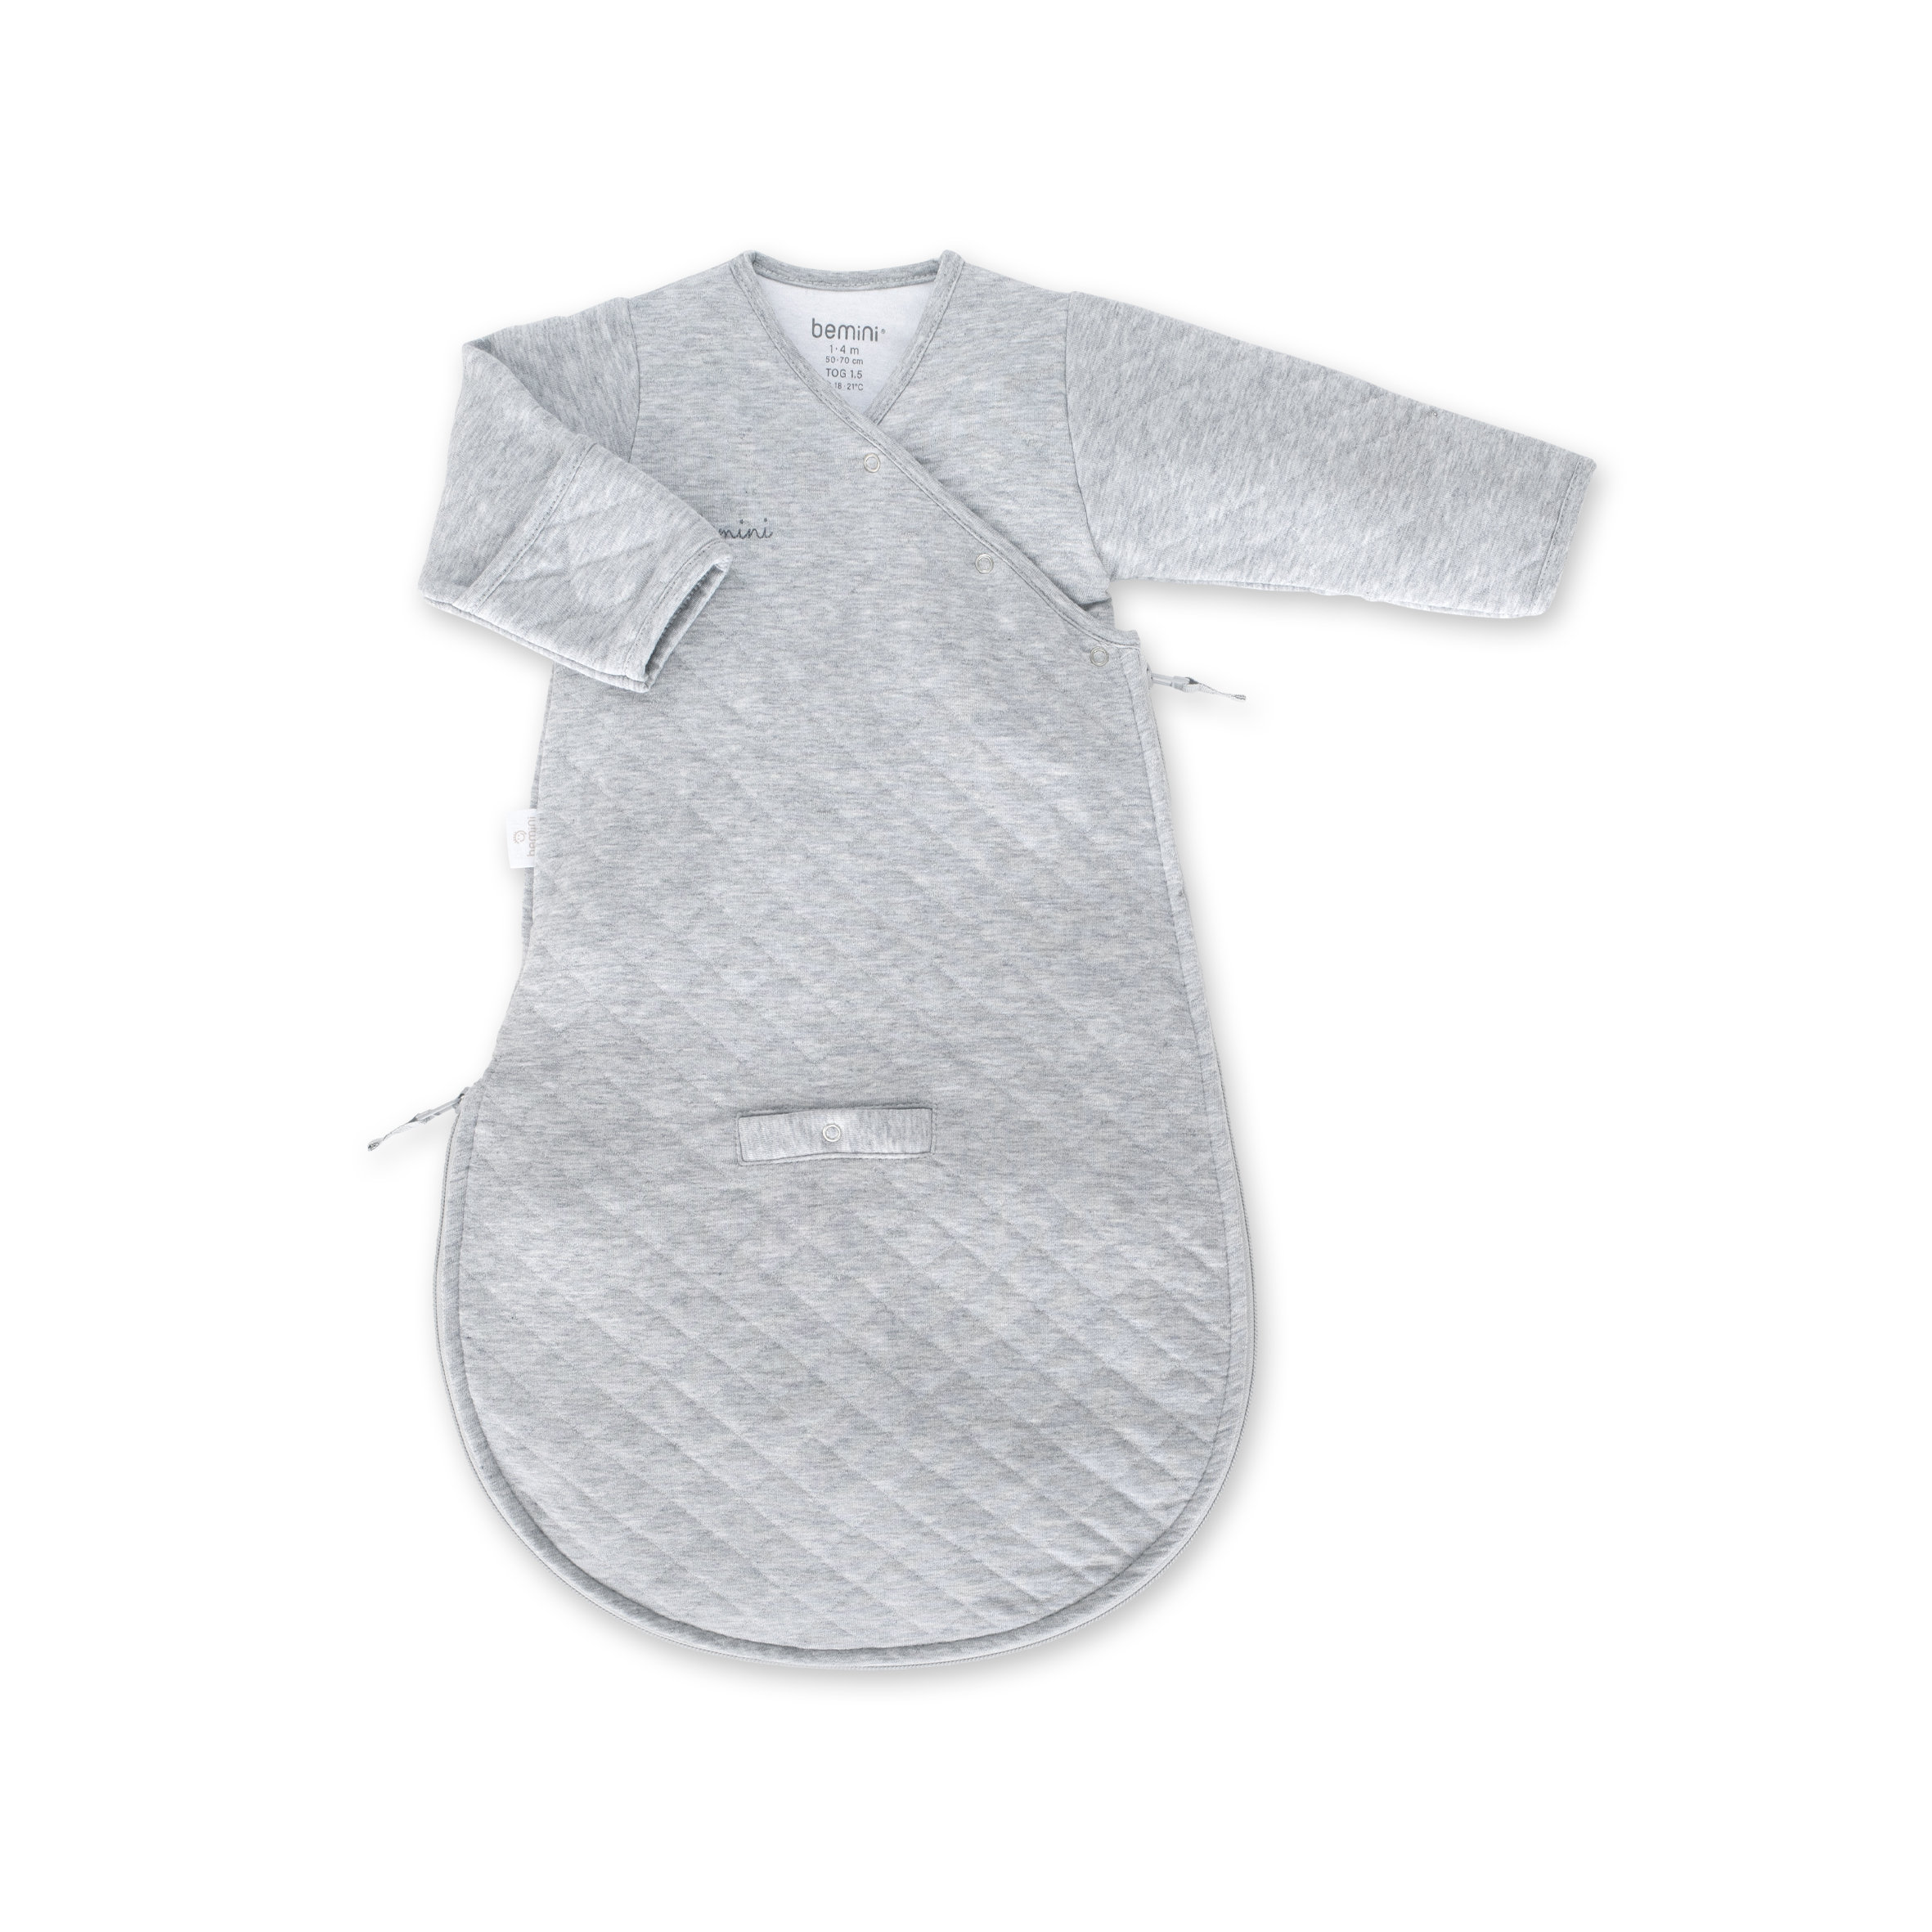 MAGIC BAG Pady quilted jersey 1-4m QUILT Mix grey tog 1.5